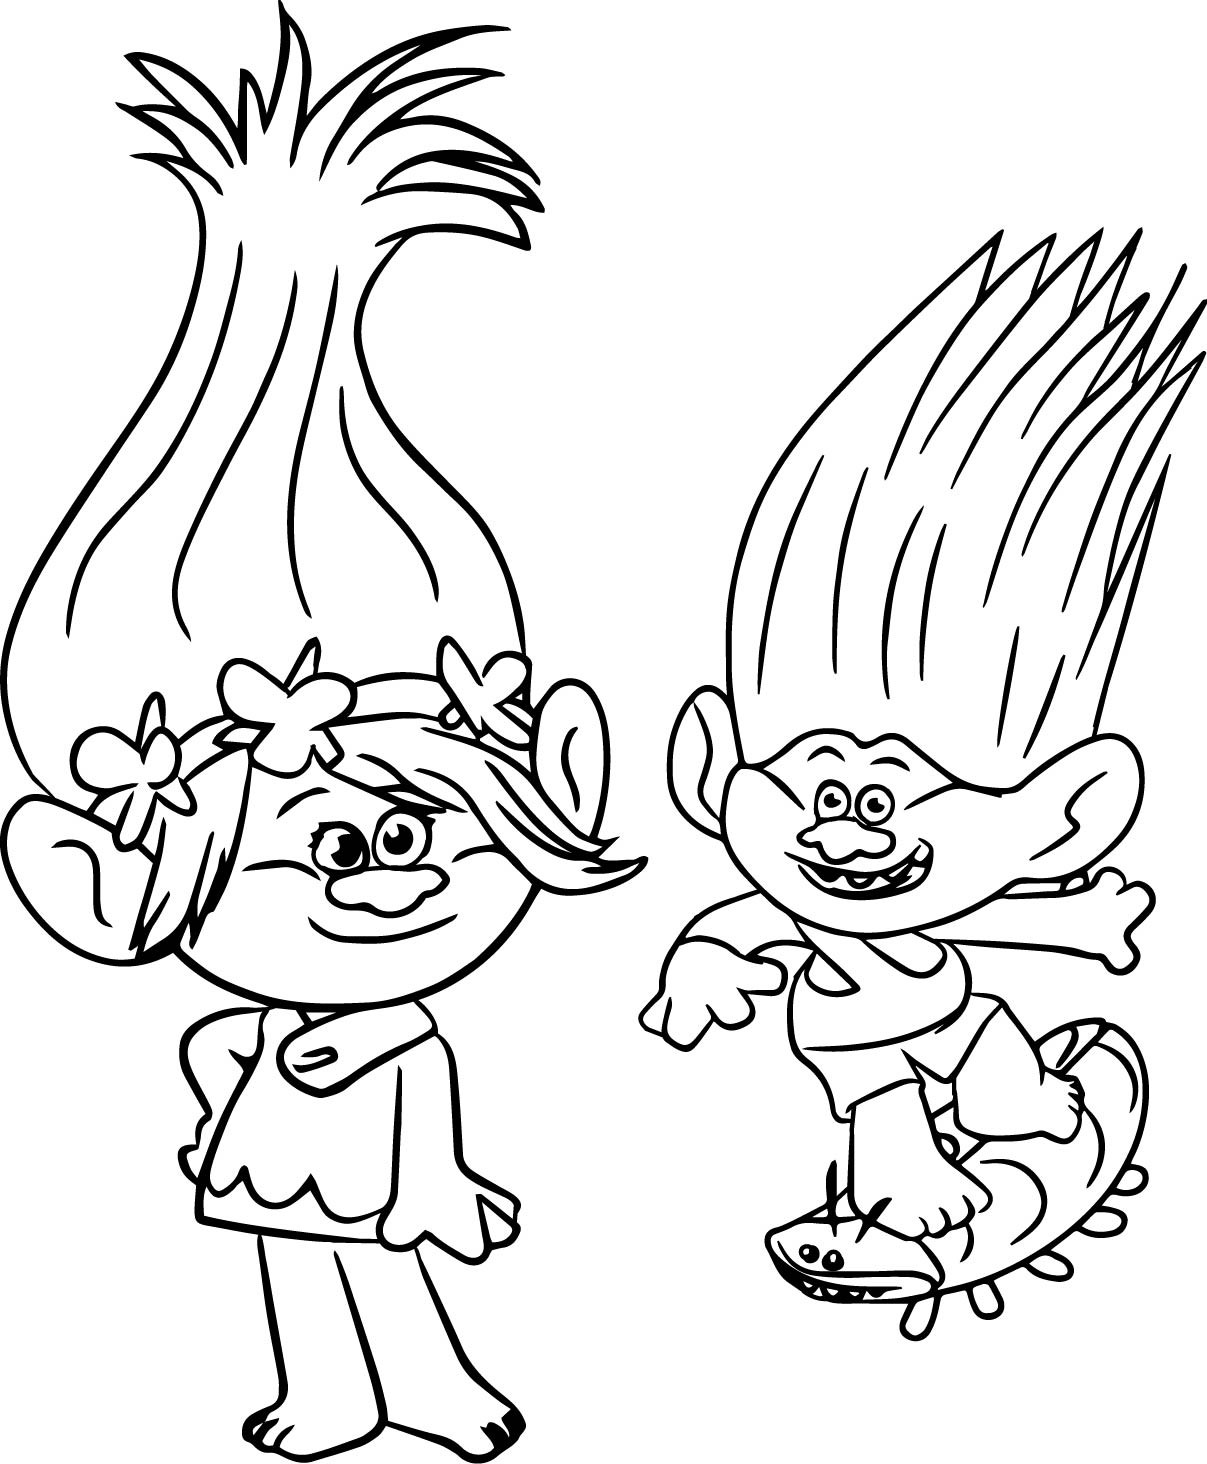 Trolls Printable Coloring Pages
 Trolls Movie Coloring Pages